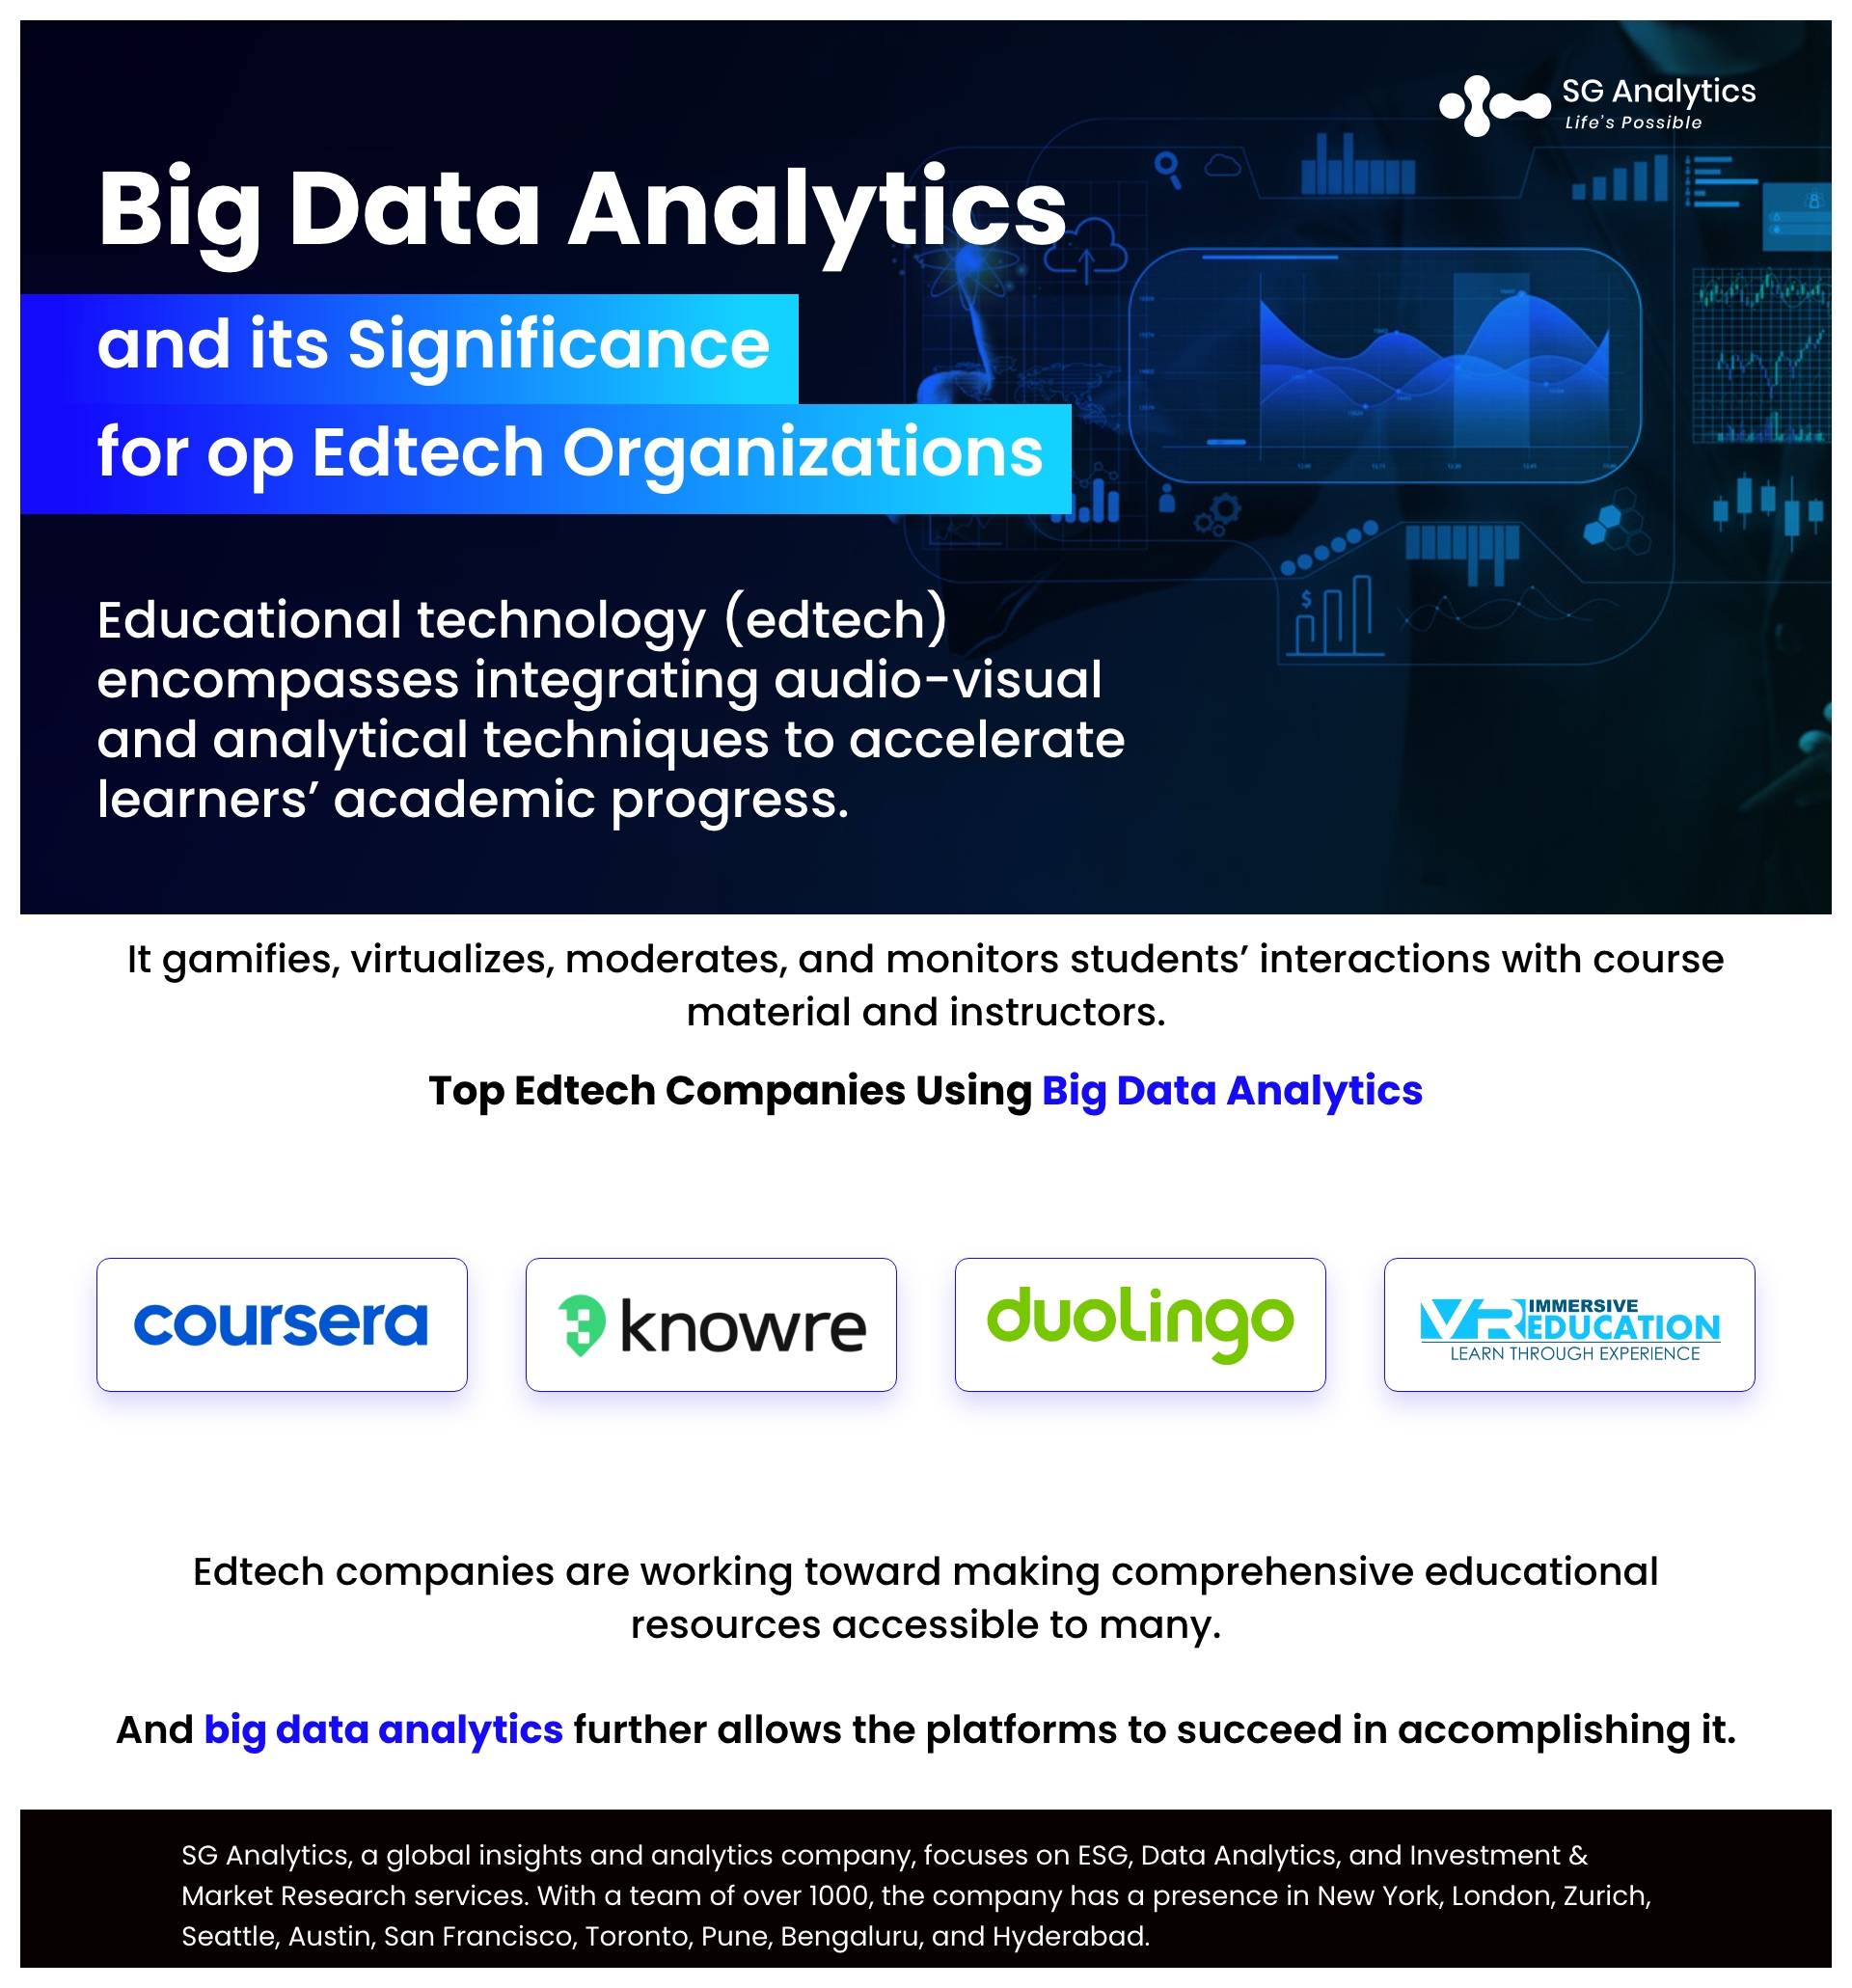 Big Data Analytics and its Significance for Top Edtech Organizations